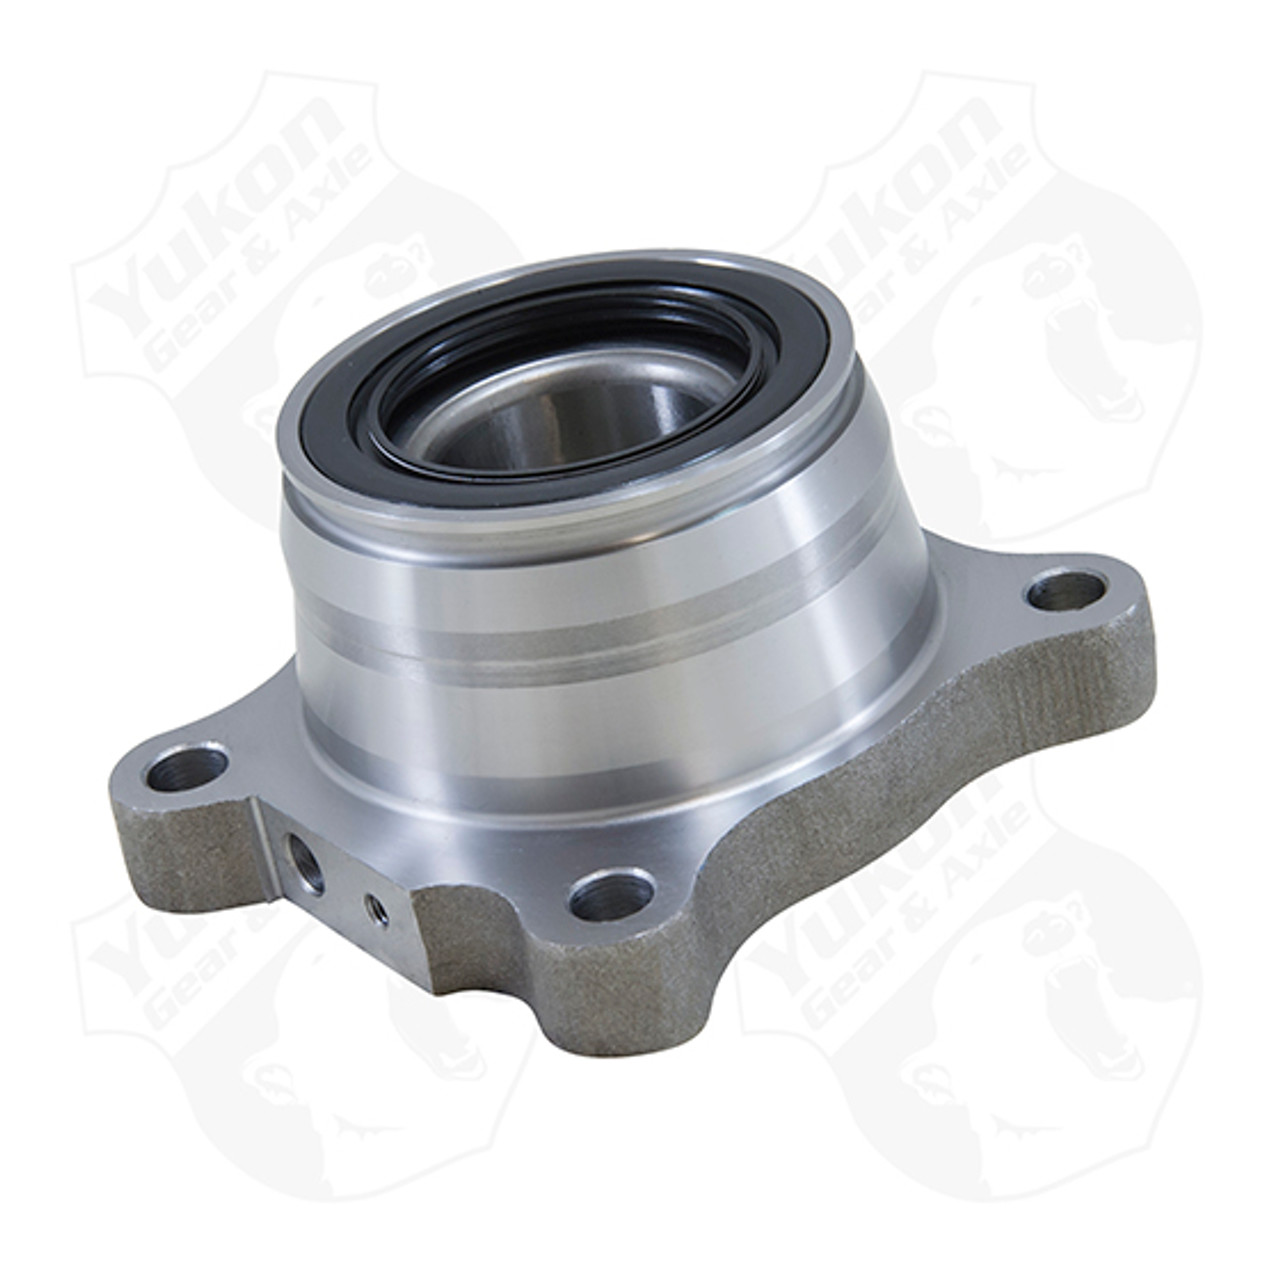 Yukon replacement unit bearing hub for '05-'16 Toyota Tacoma rear, right hand side